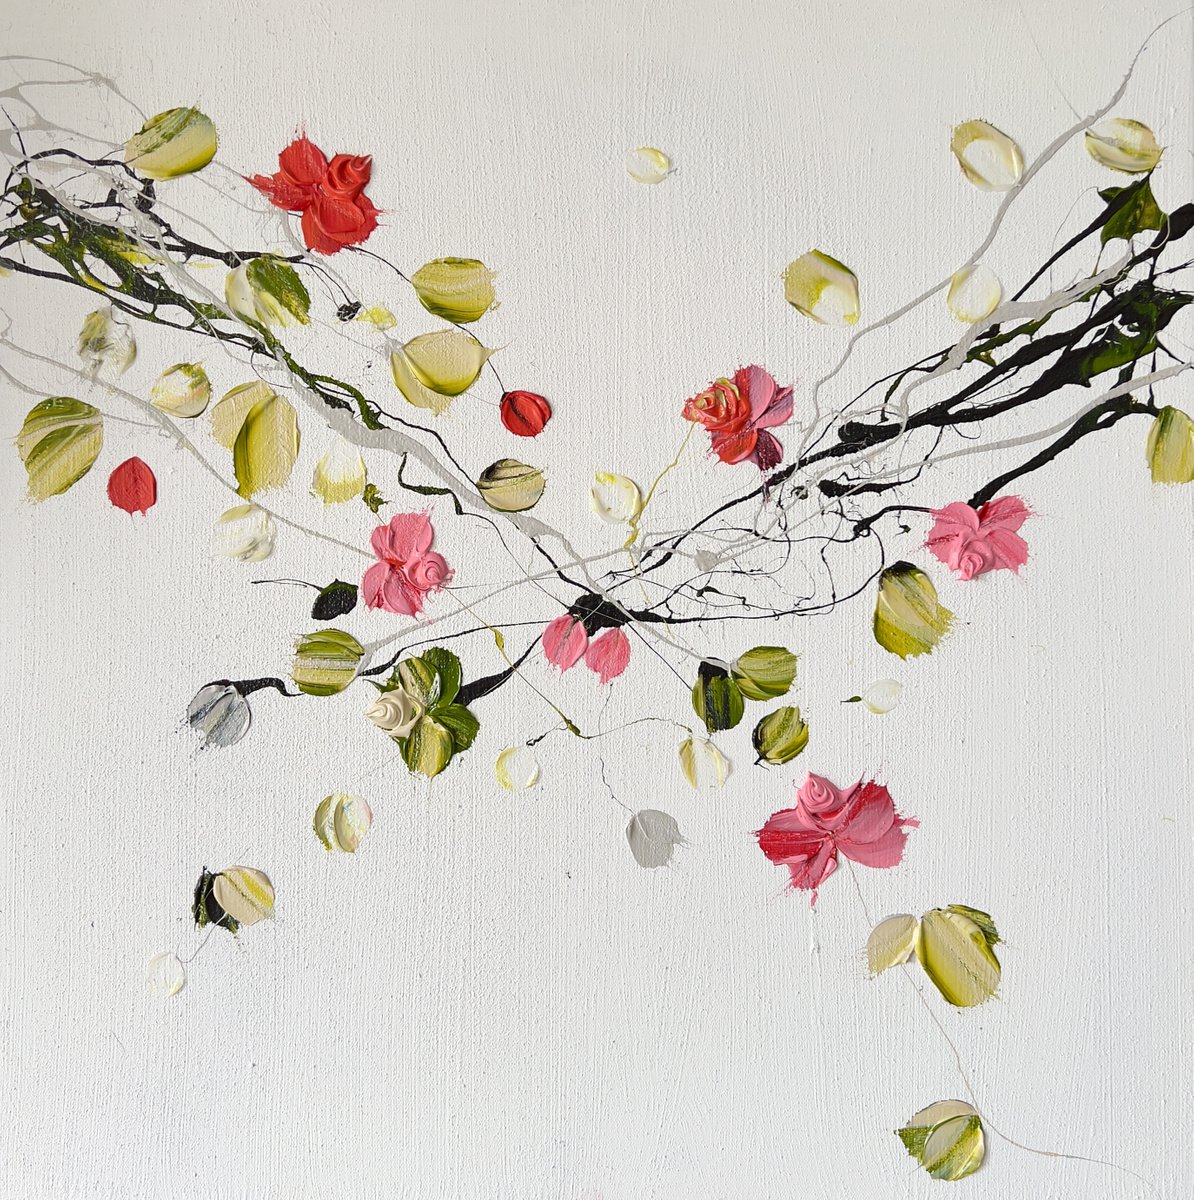 Square acrylic structure painting with flowers Entwined 60x60x2cm, mixed media by Anastassia Skopp